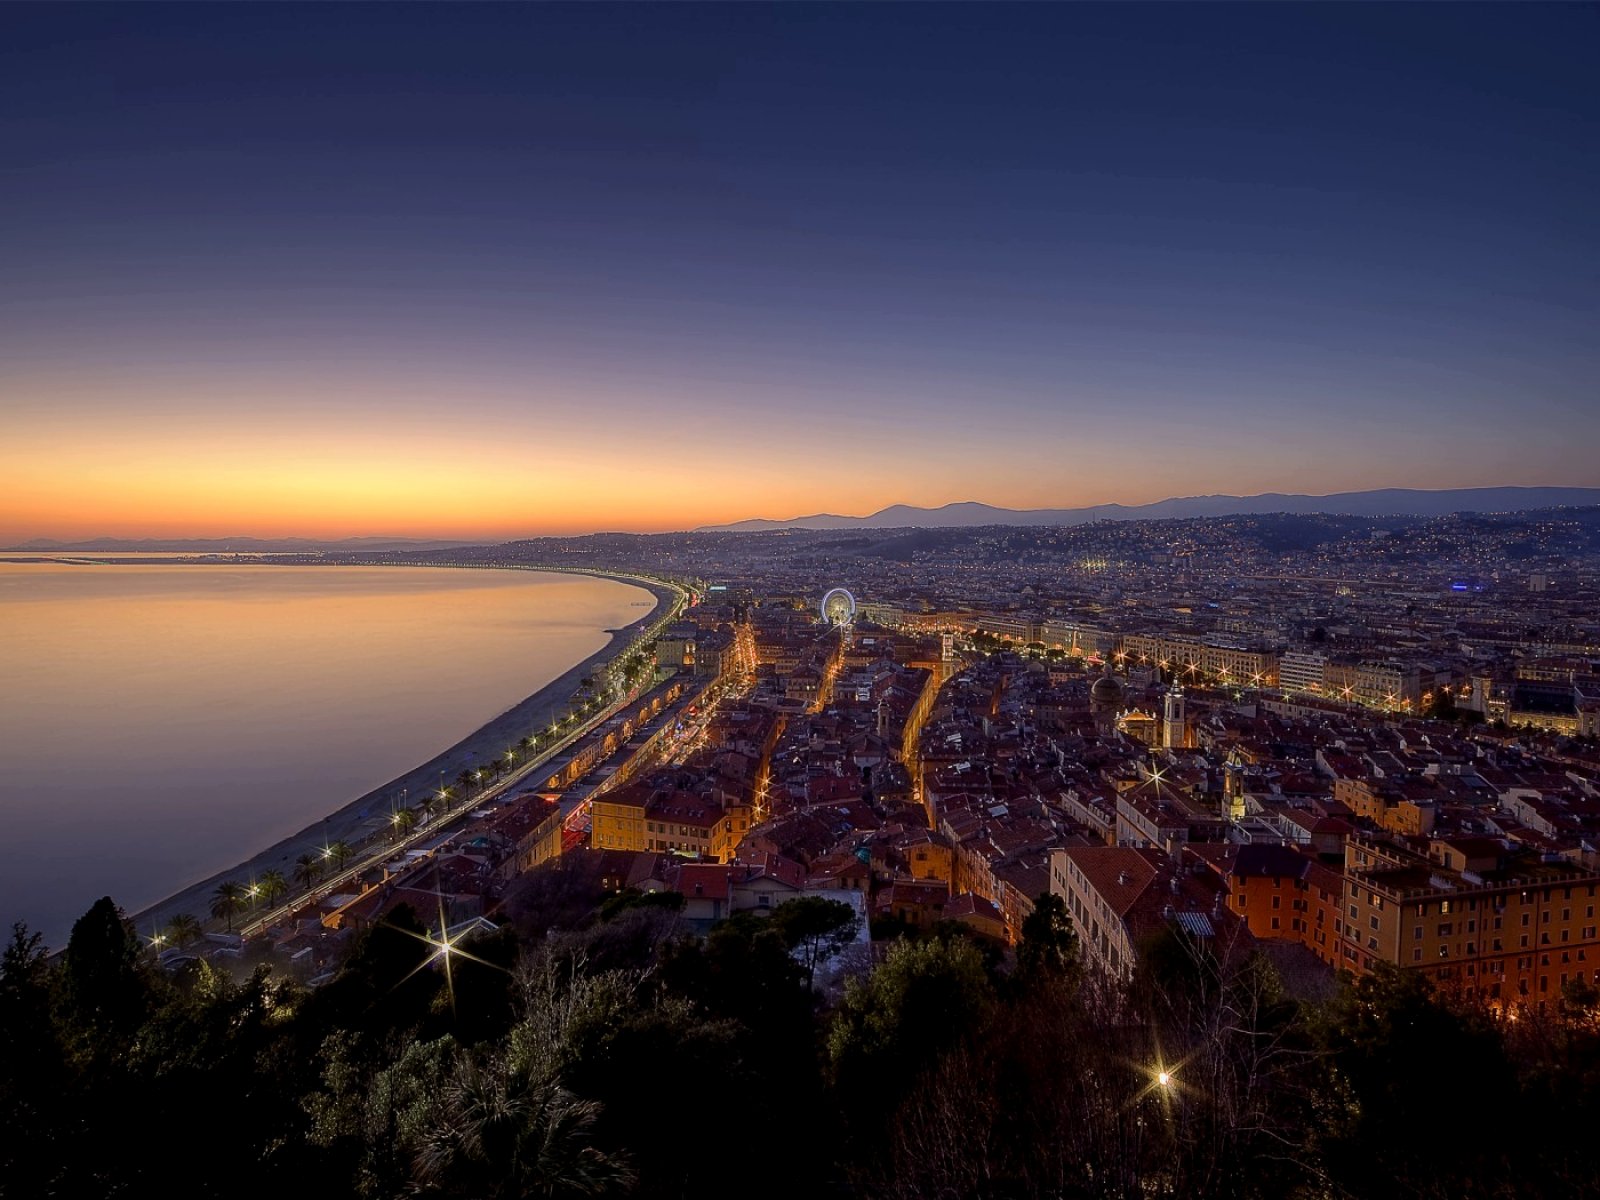 How to see the sunset from the top of Castle Hill in Nice